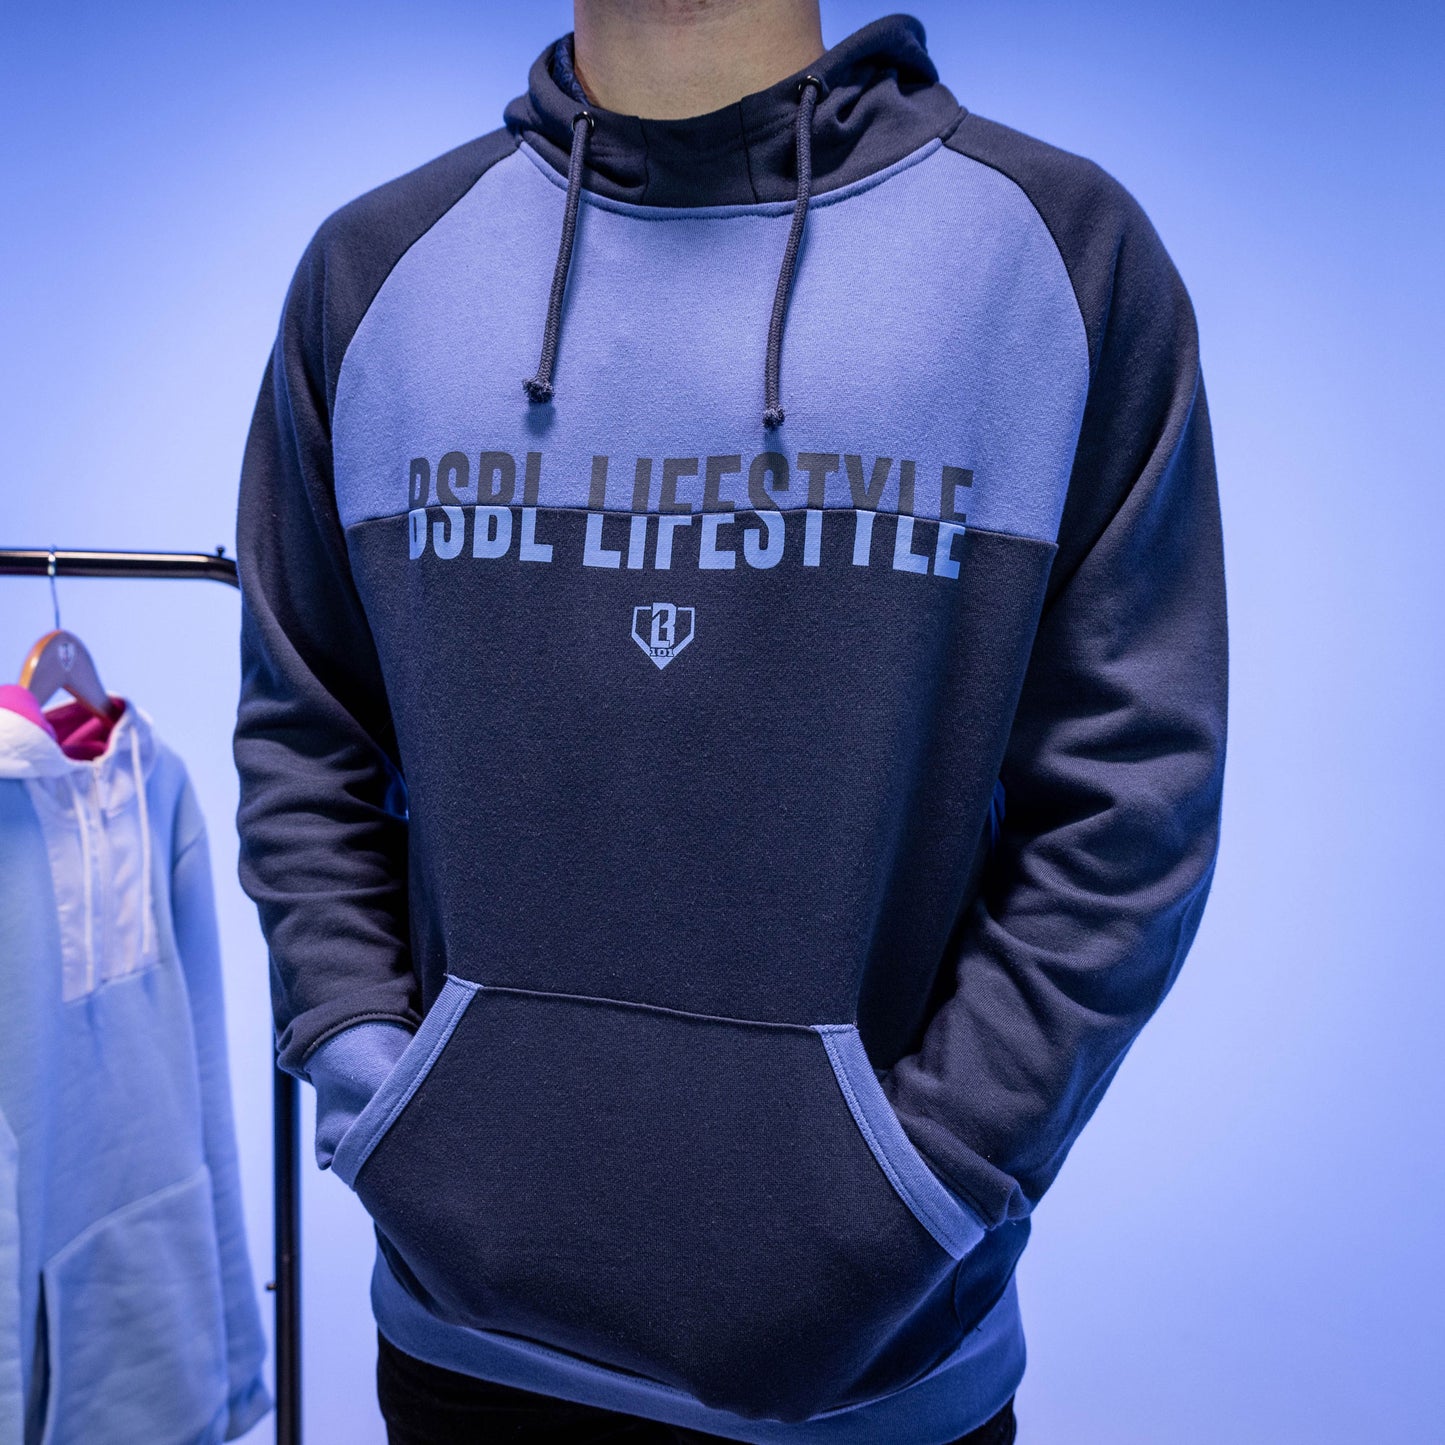 Double Play Youth Hoodie - Navy/Light Blue